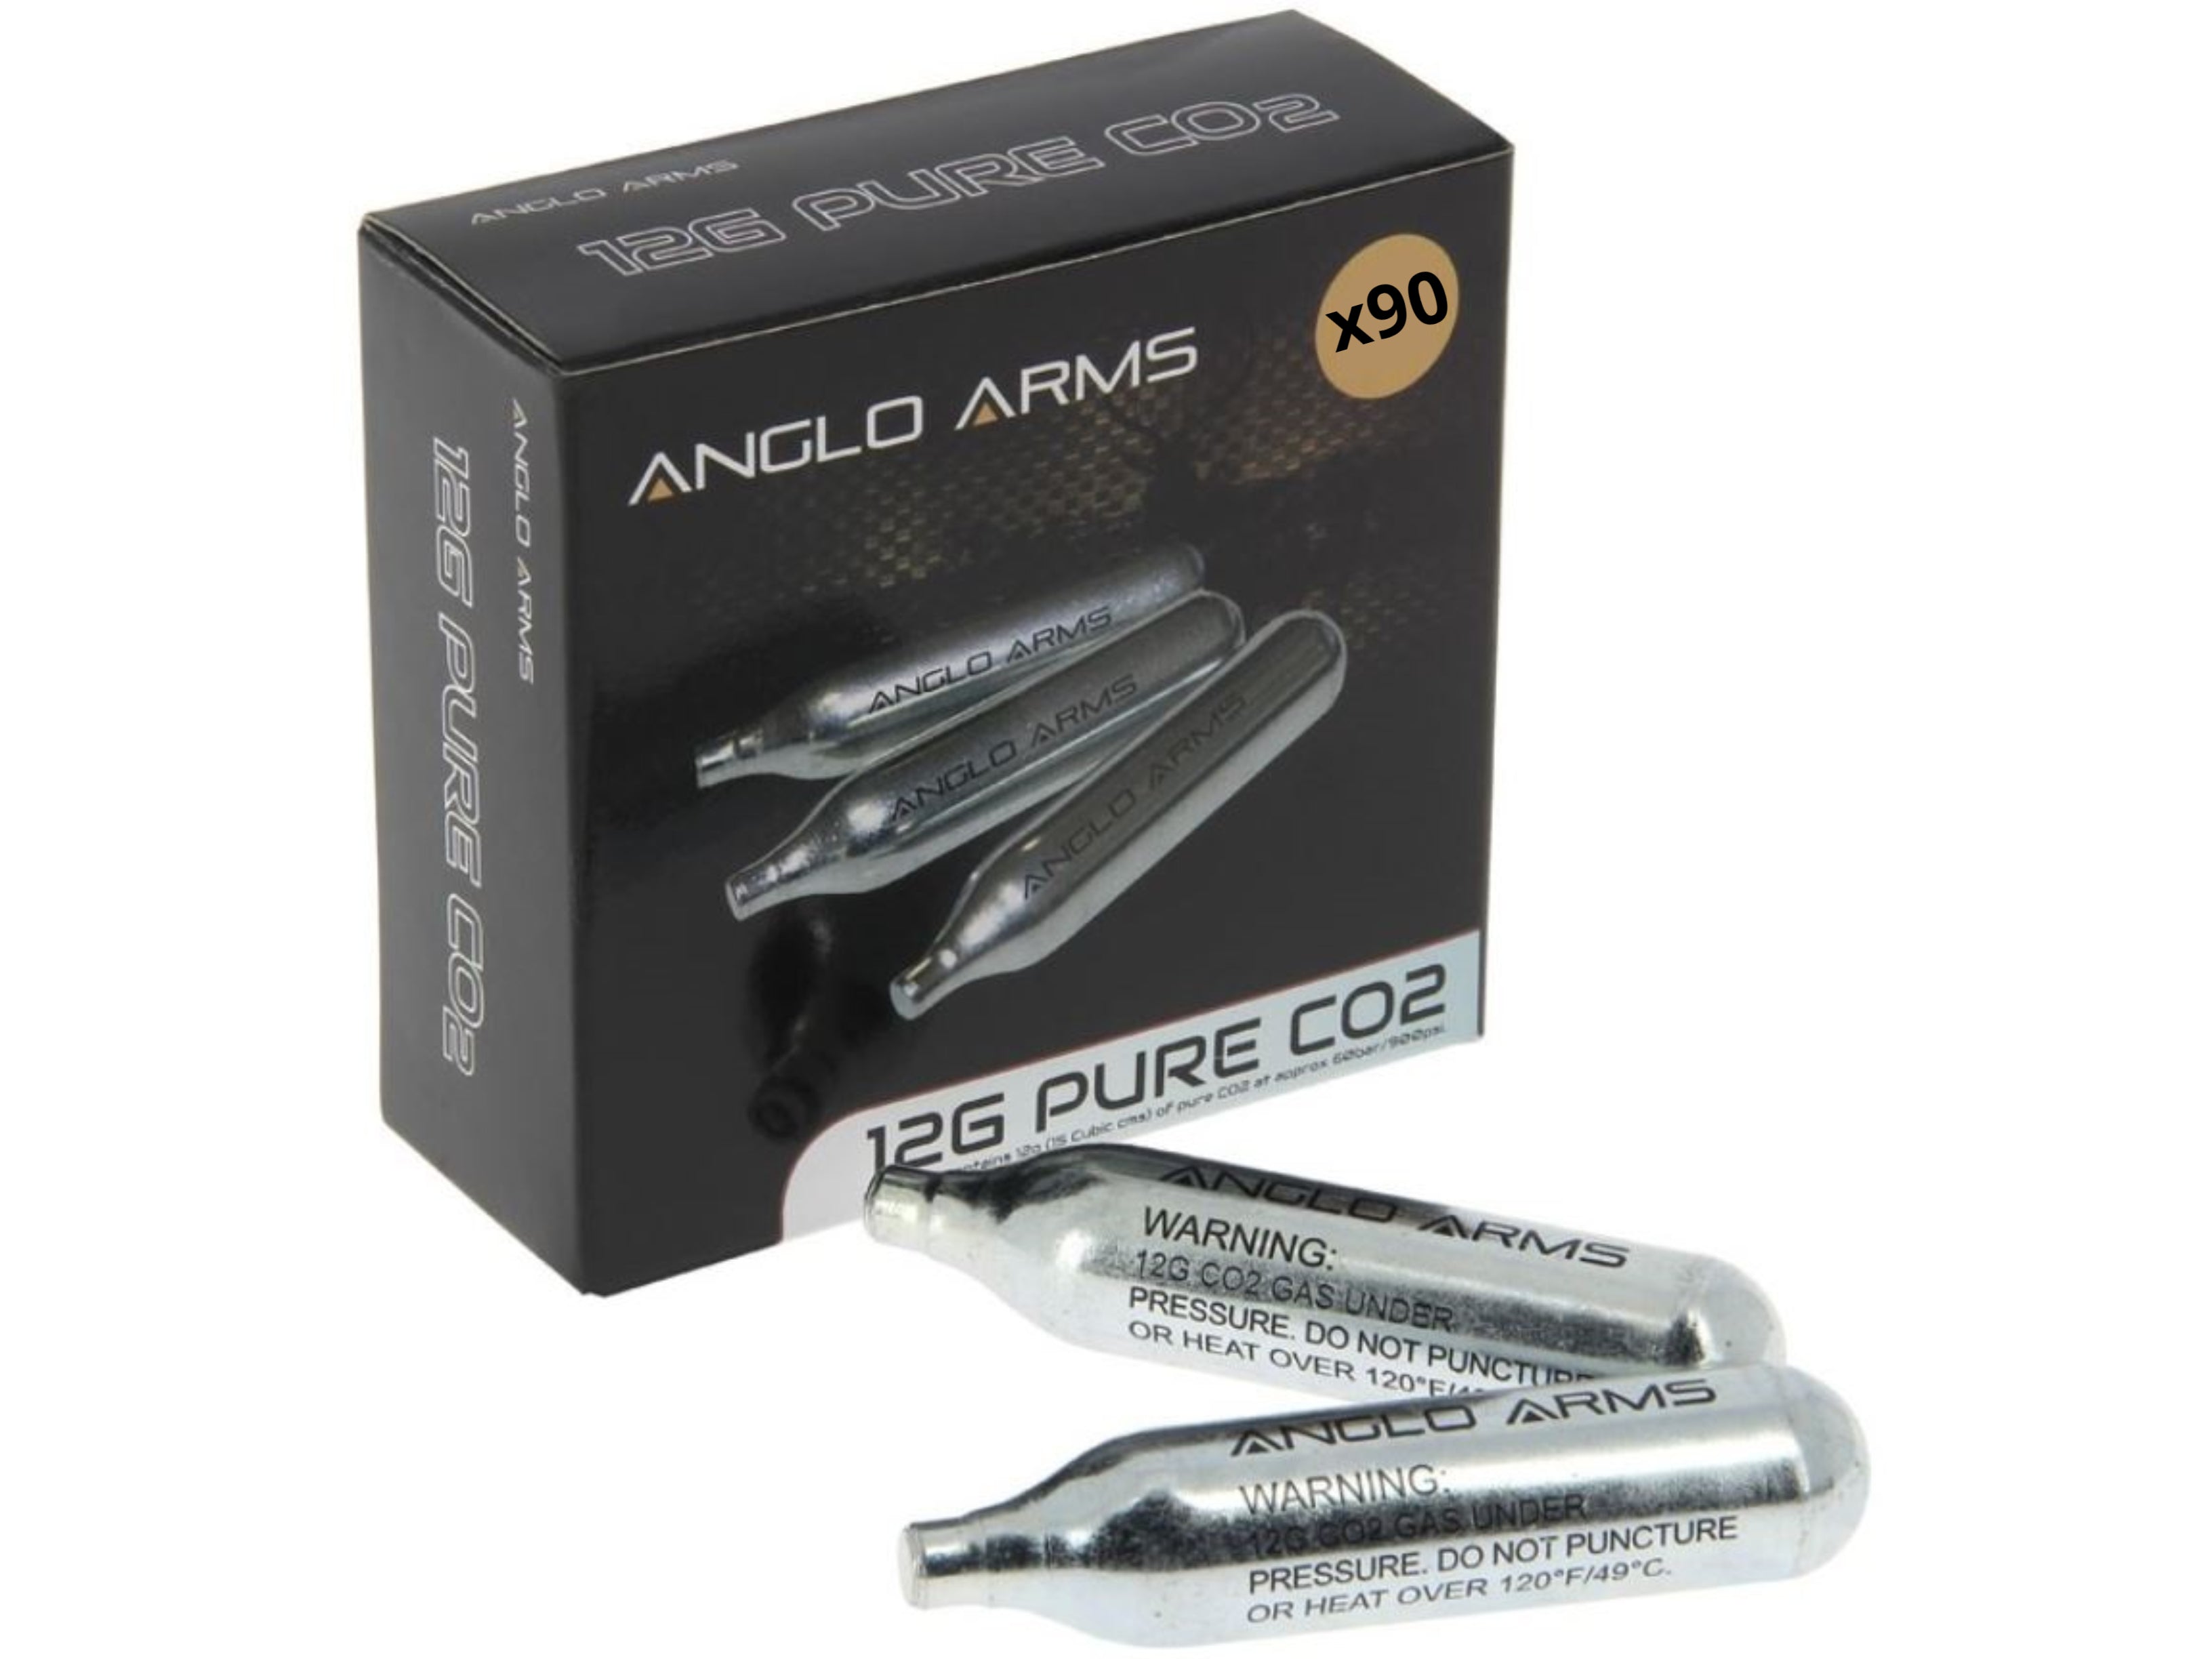 ANGLO ARMS 90 X ANGLO ARMS 12G GRAM CO2 CAPSULE CARTRIDGE SET